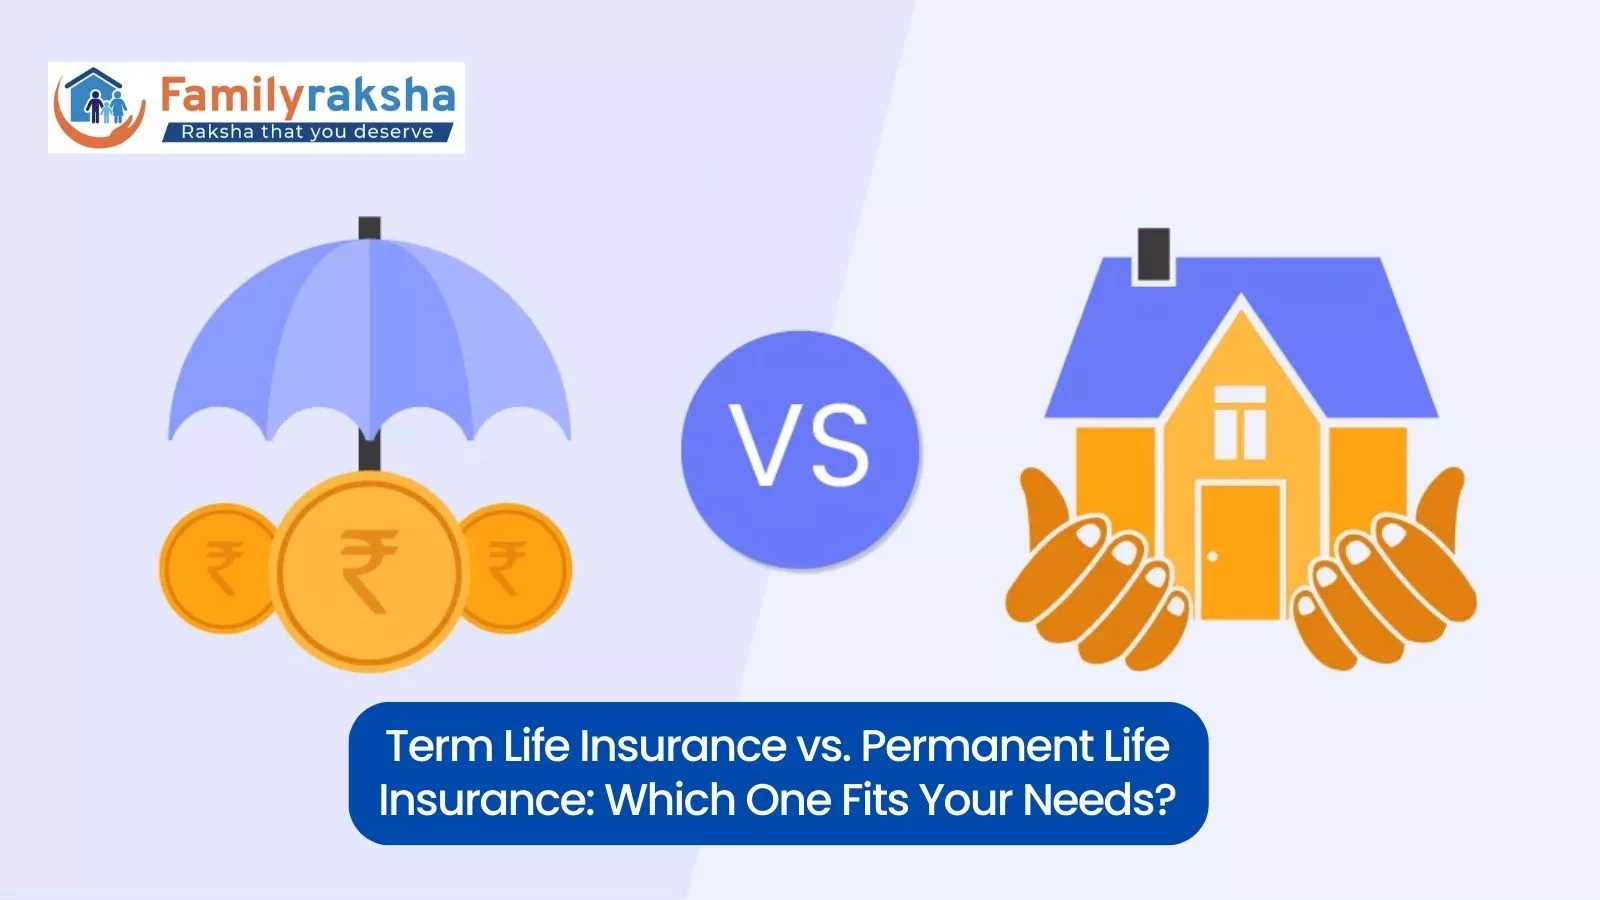 Term Life Insurance Vs. Permanent Life Insurance: Which One Fits Your Needs?